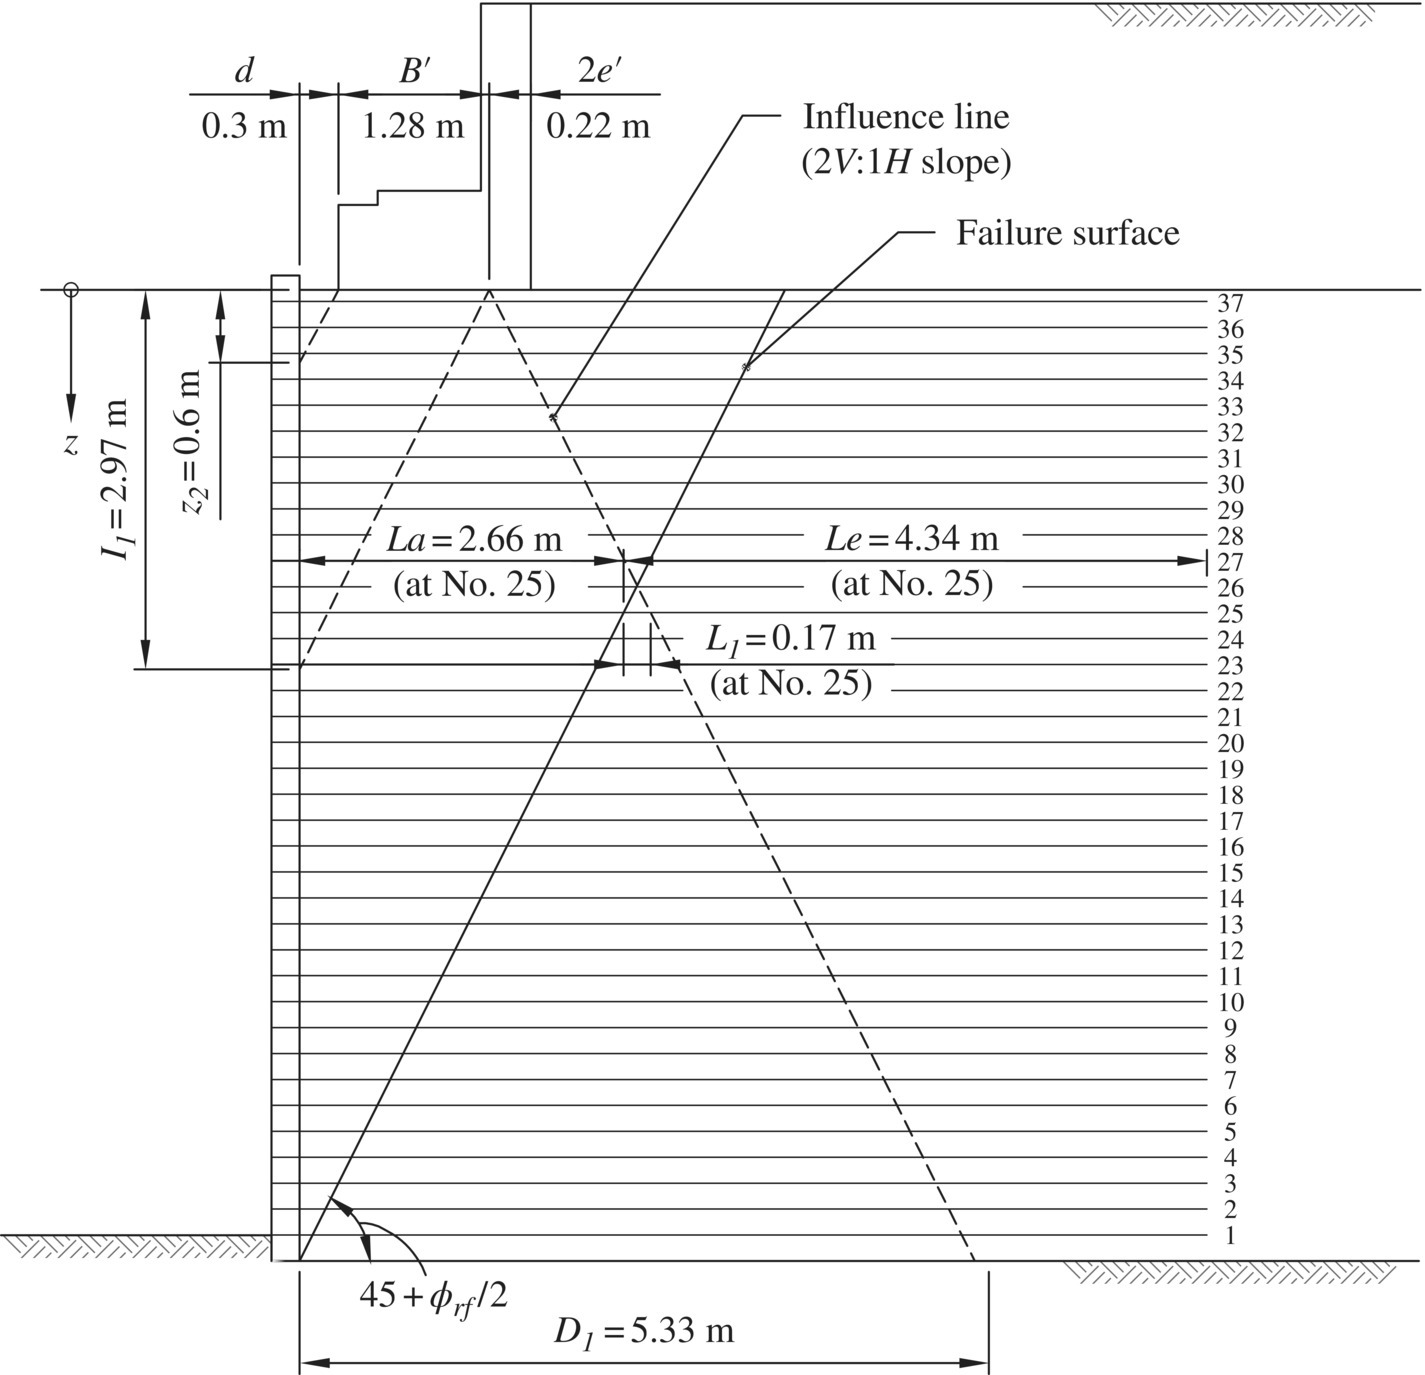 Schematic illustrating the parameters involved in evaluating the internal stability of an abutment, with an ascending solid line for failure surface intersecting an ascending–descending line for influence line.